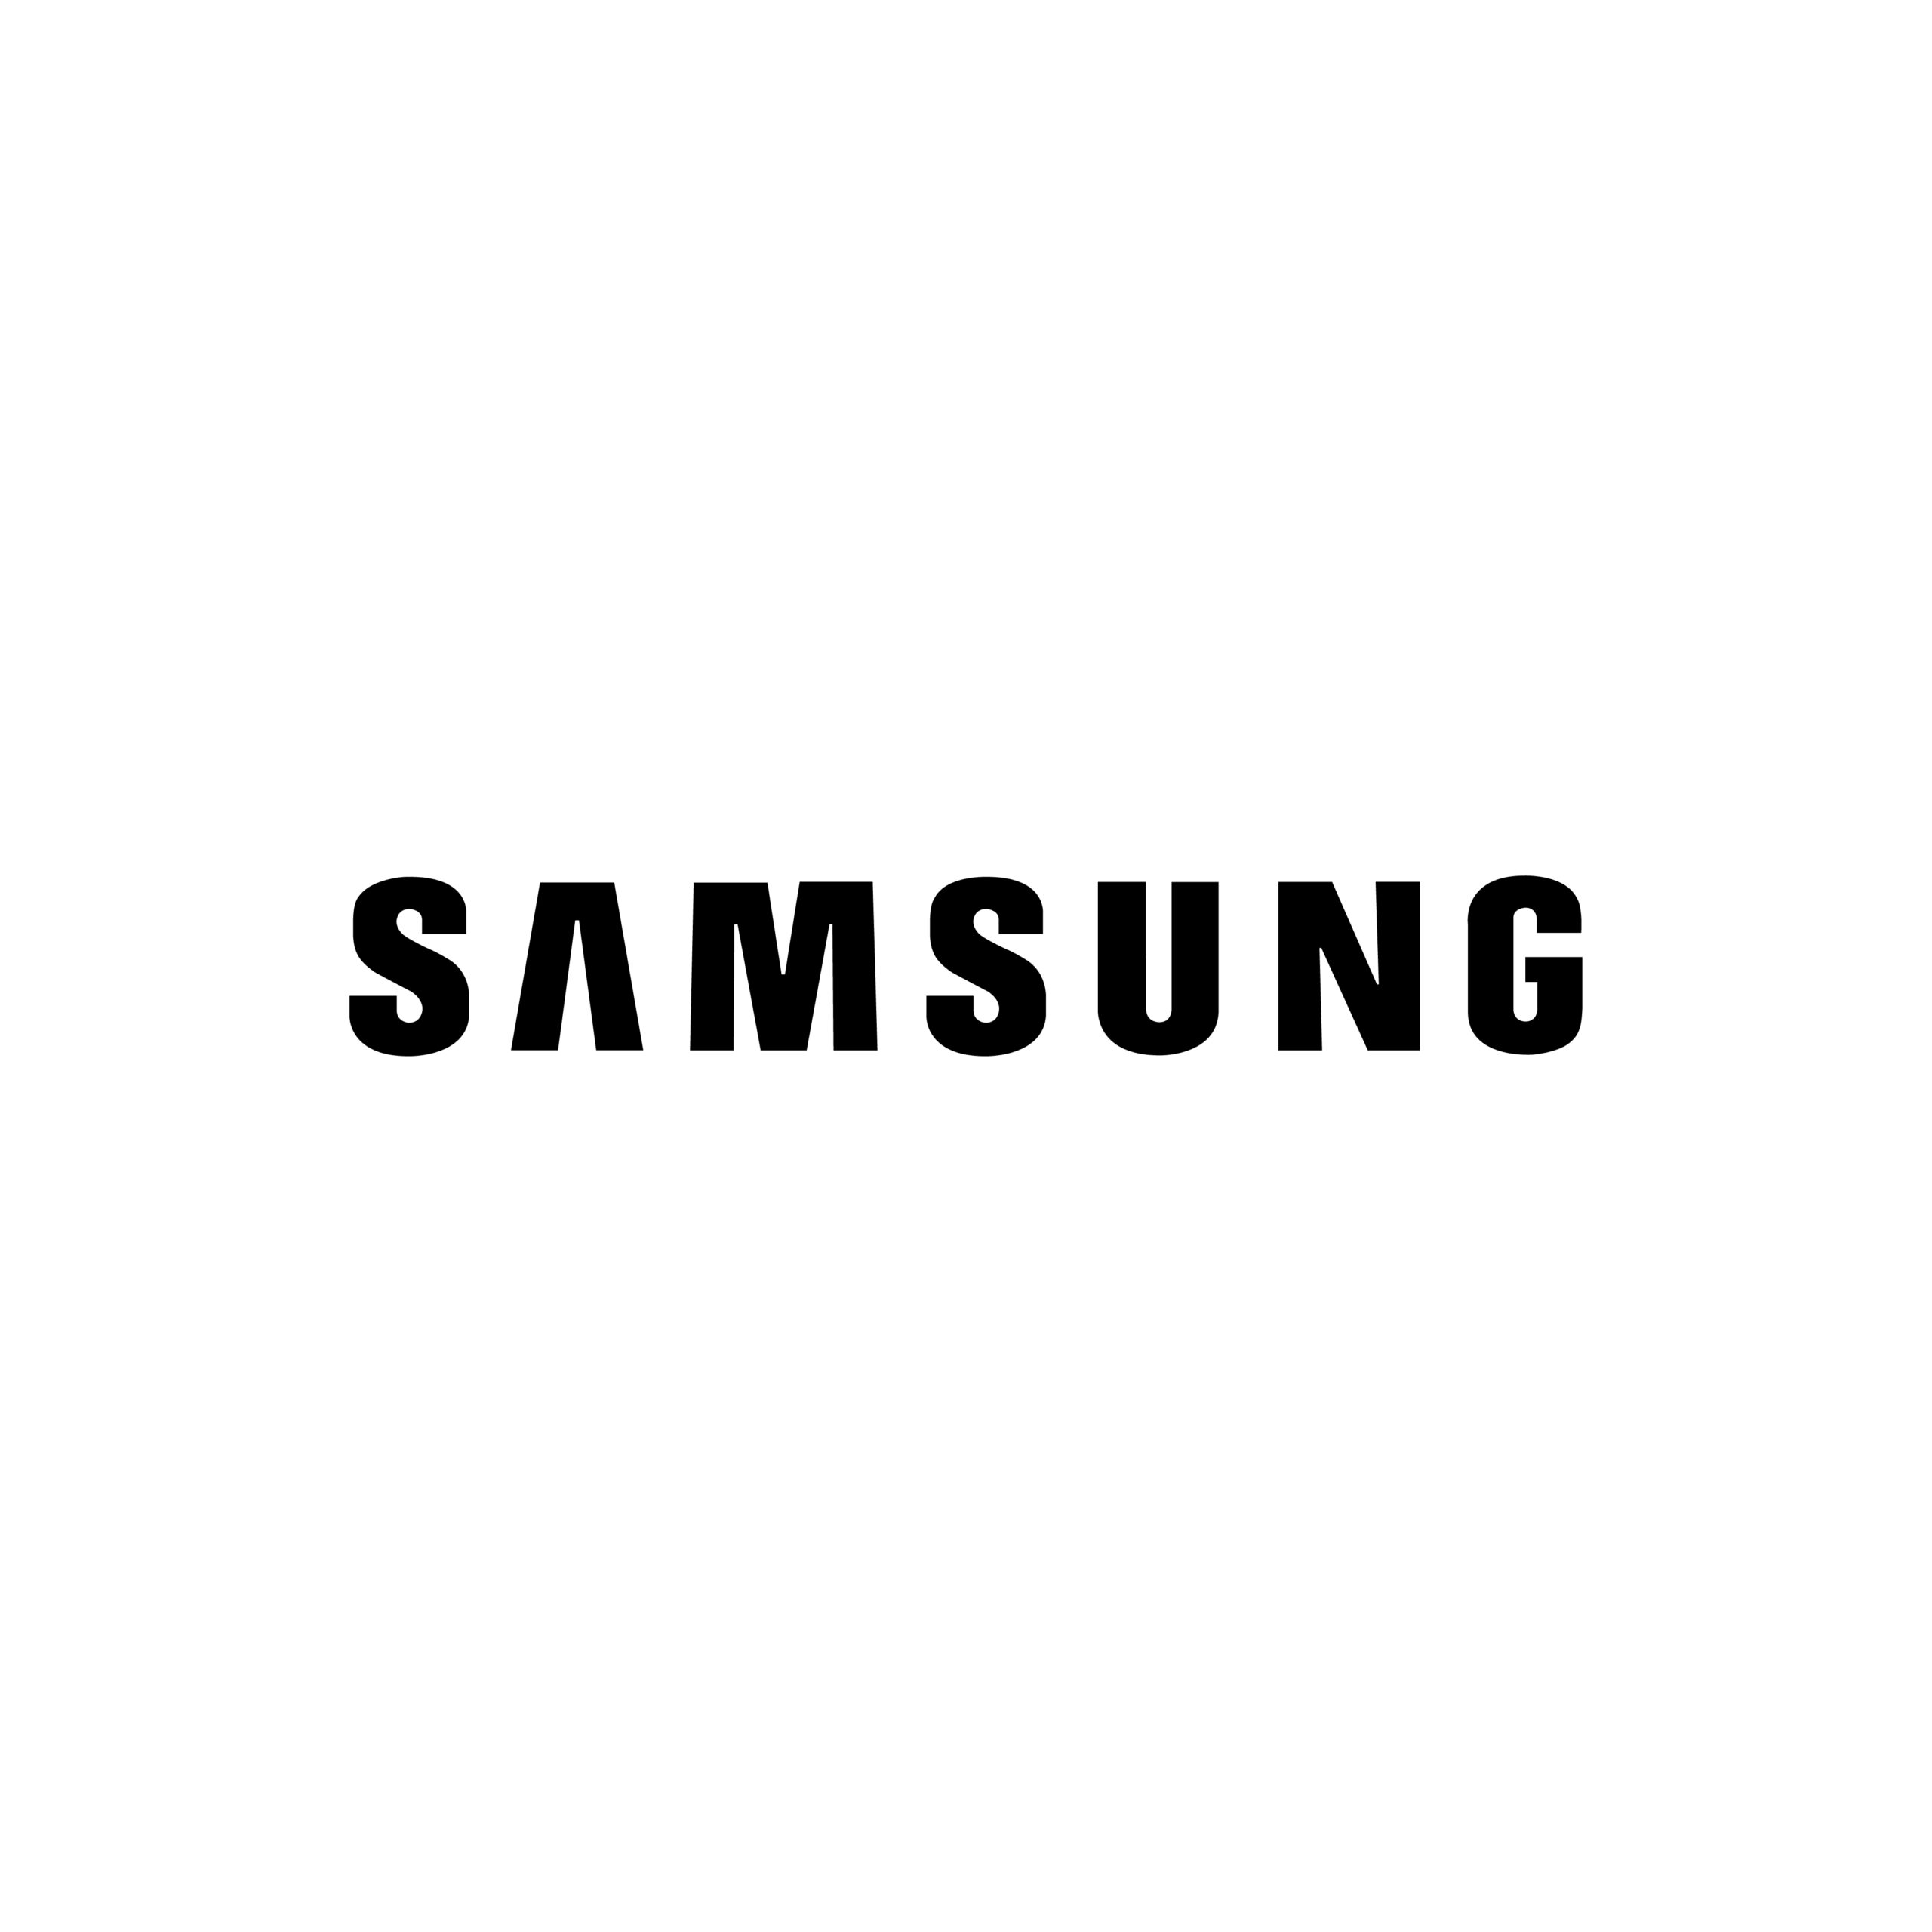 Download HD Samsung Logo Black And White - Iheartradio Logo White  Transparent PNG Image - NicePNG.com